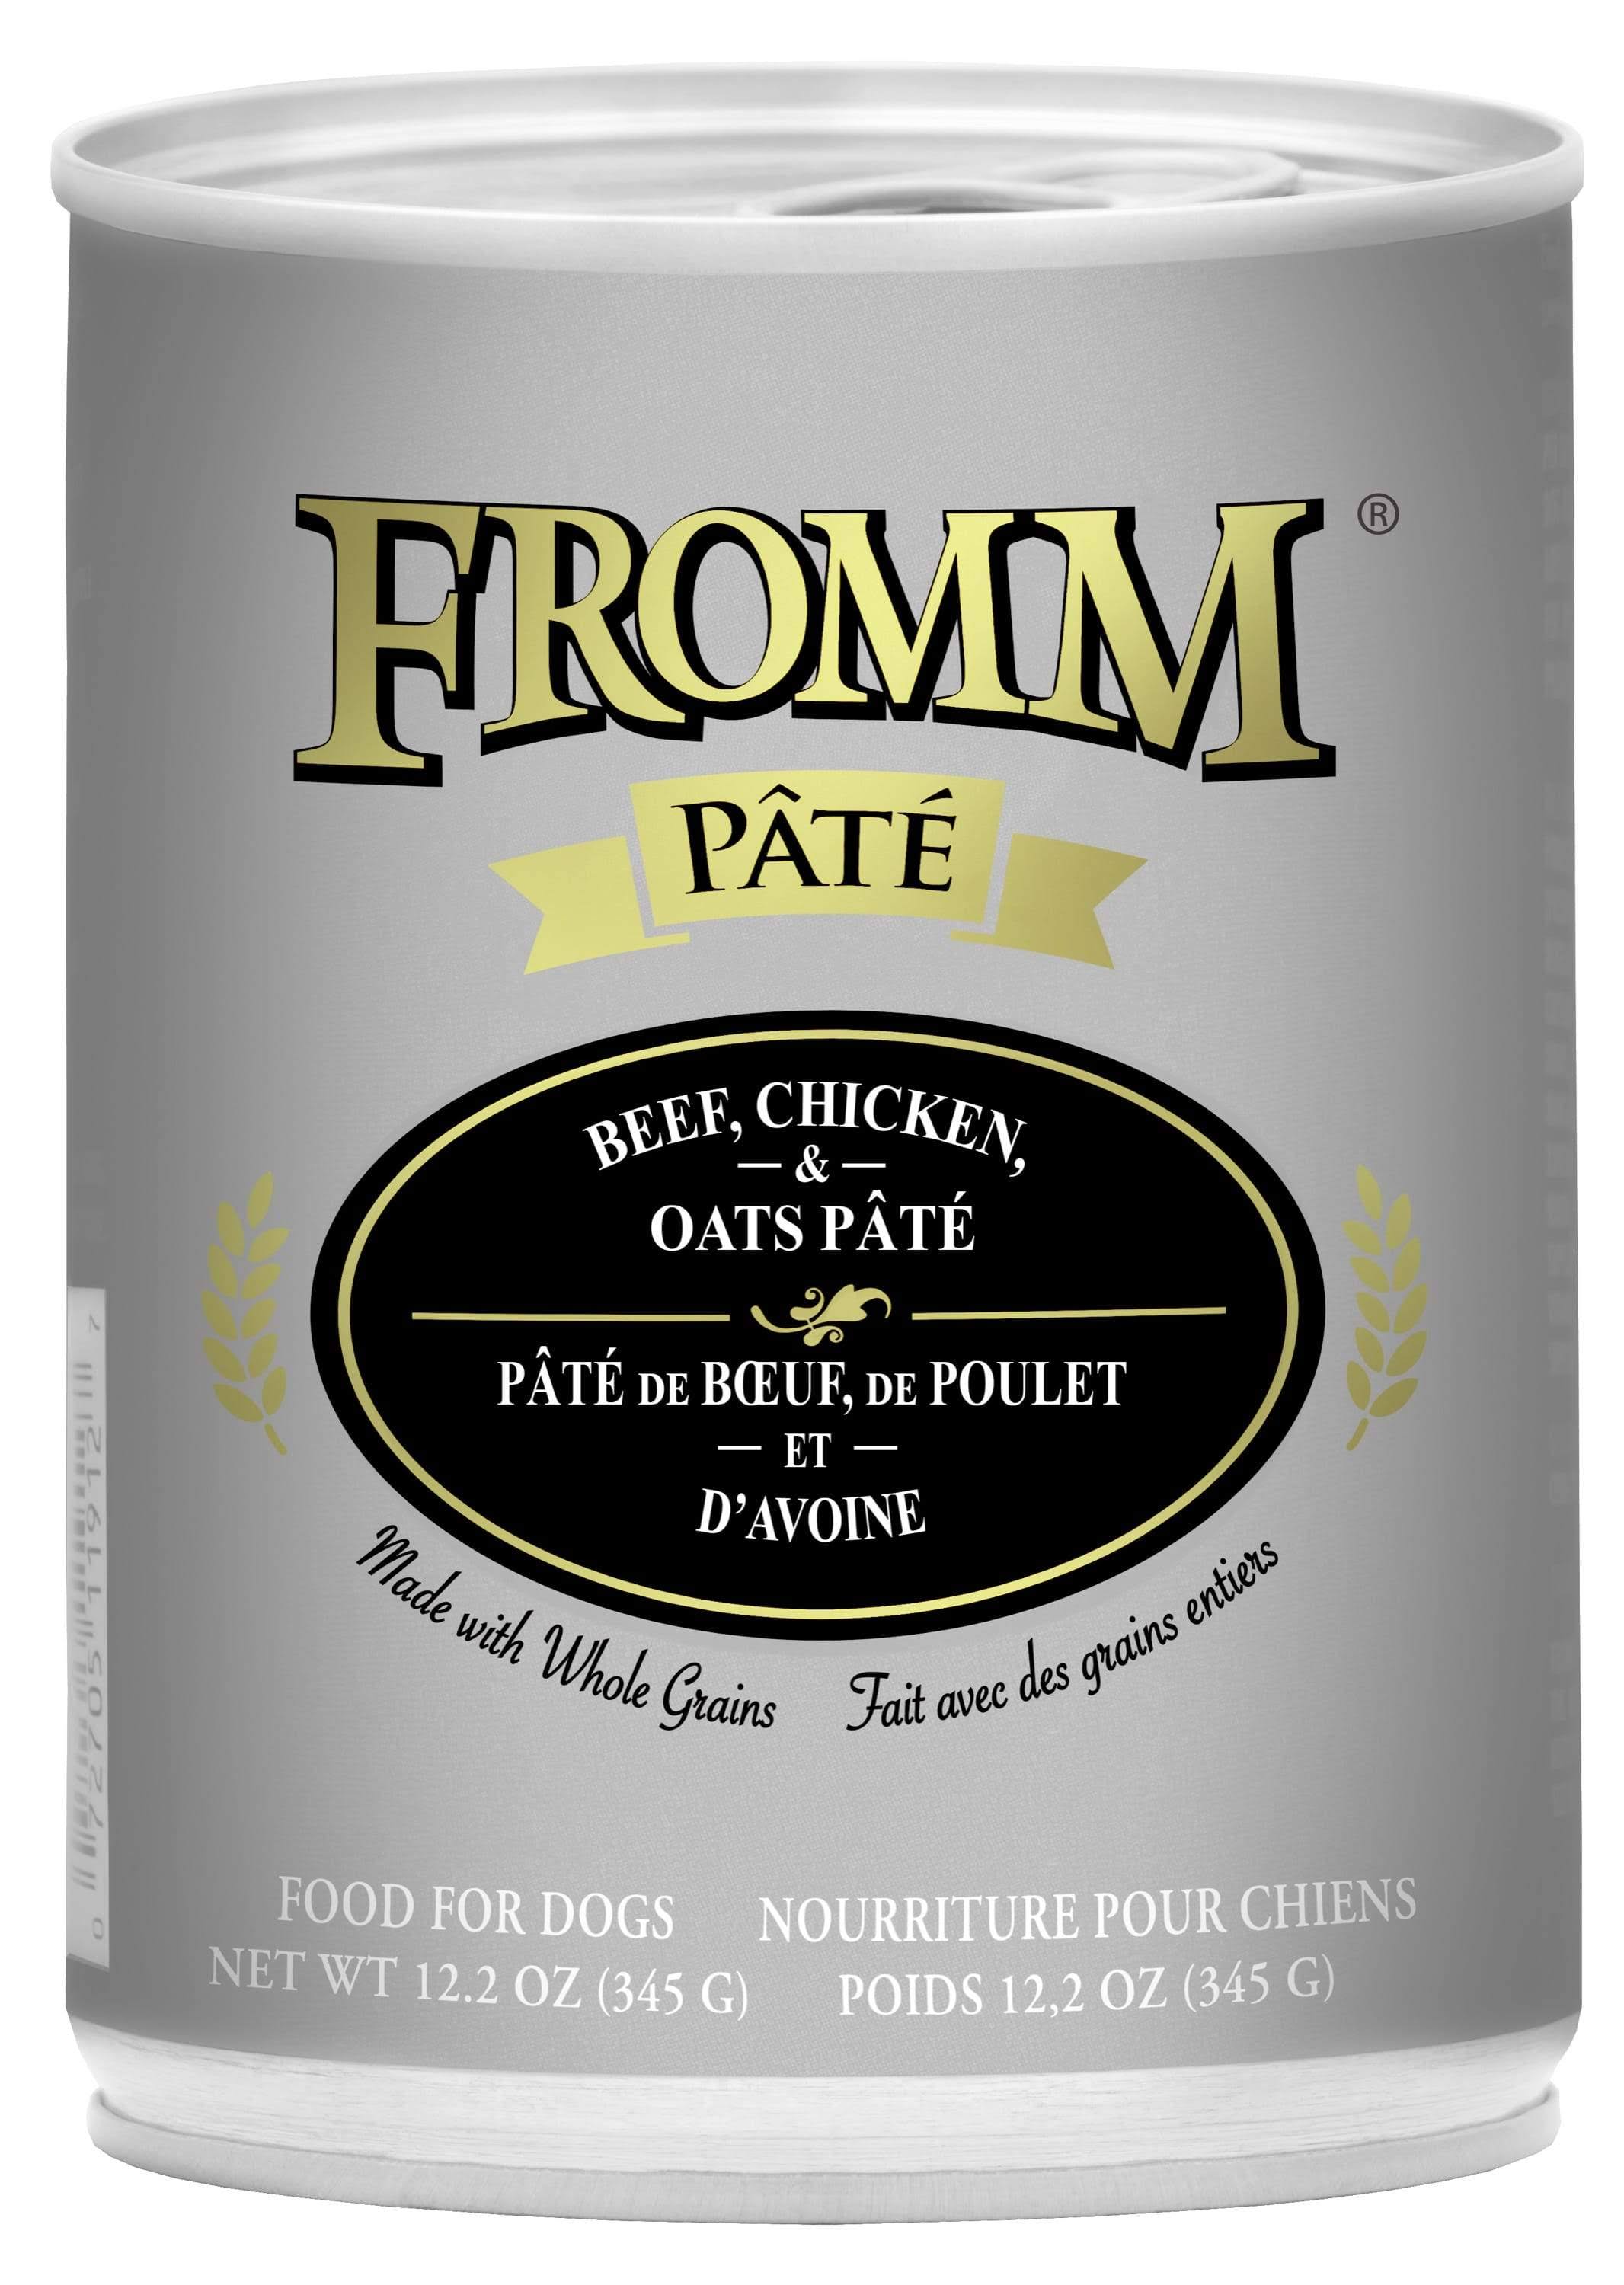 Fromm Pate Beef, Chicken & Oats Canned Dog Food - 12.2 oz.